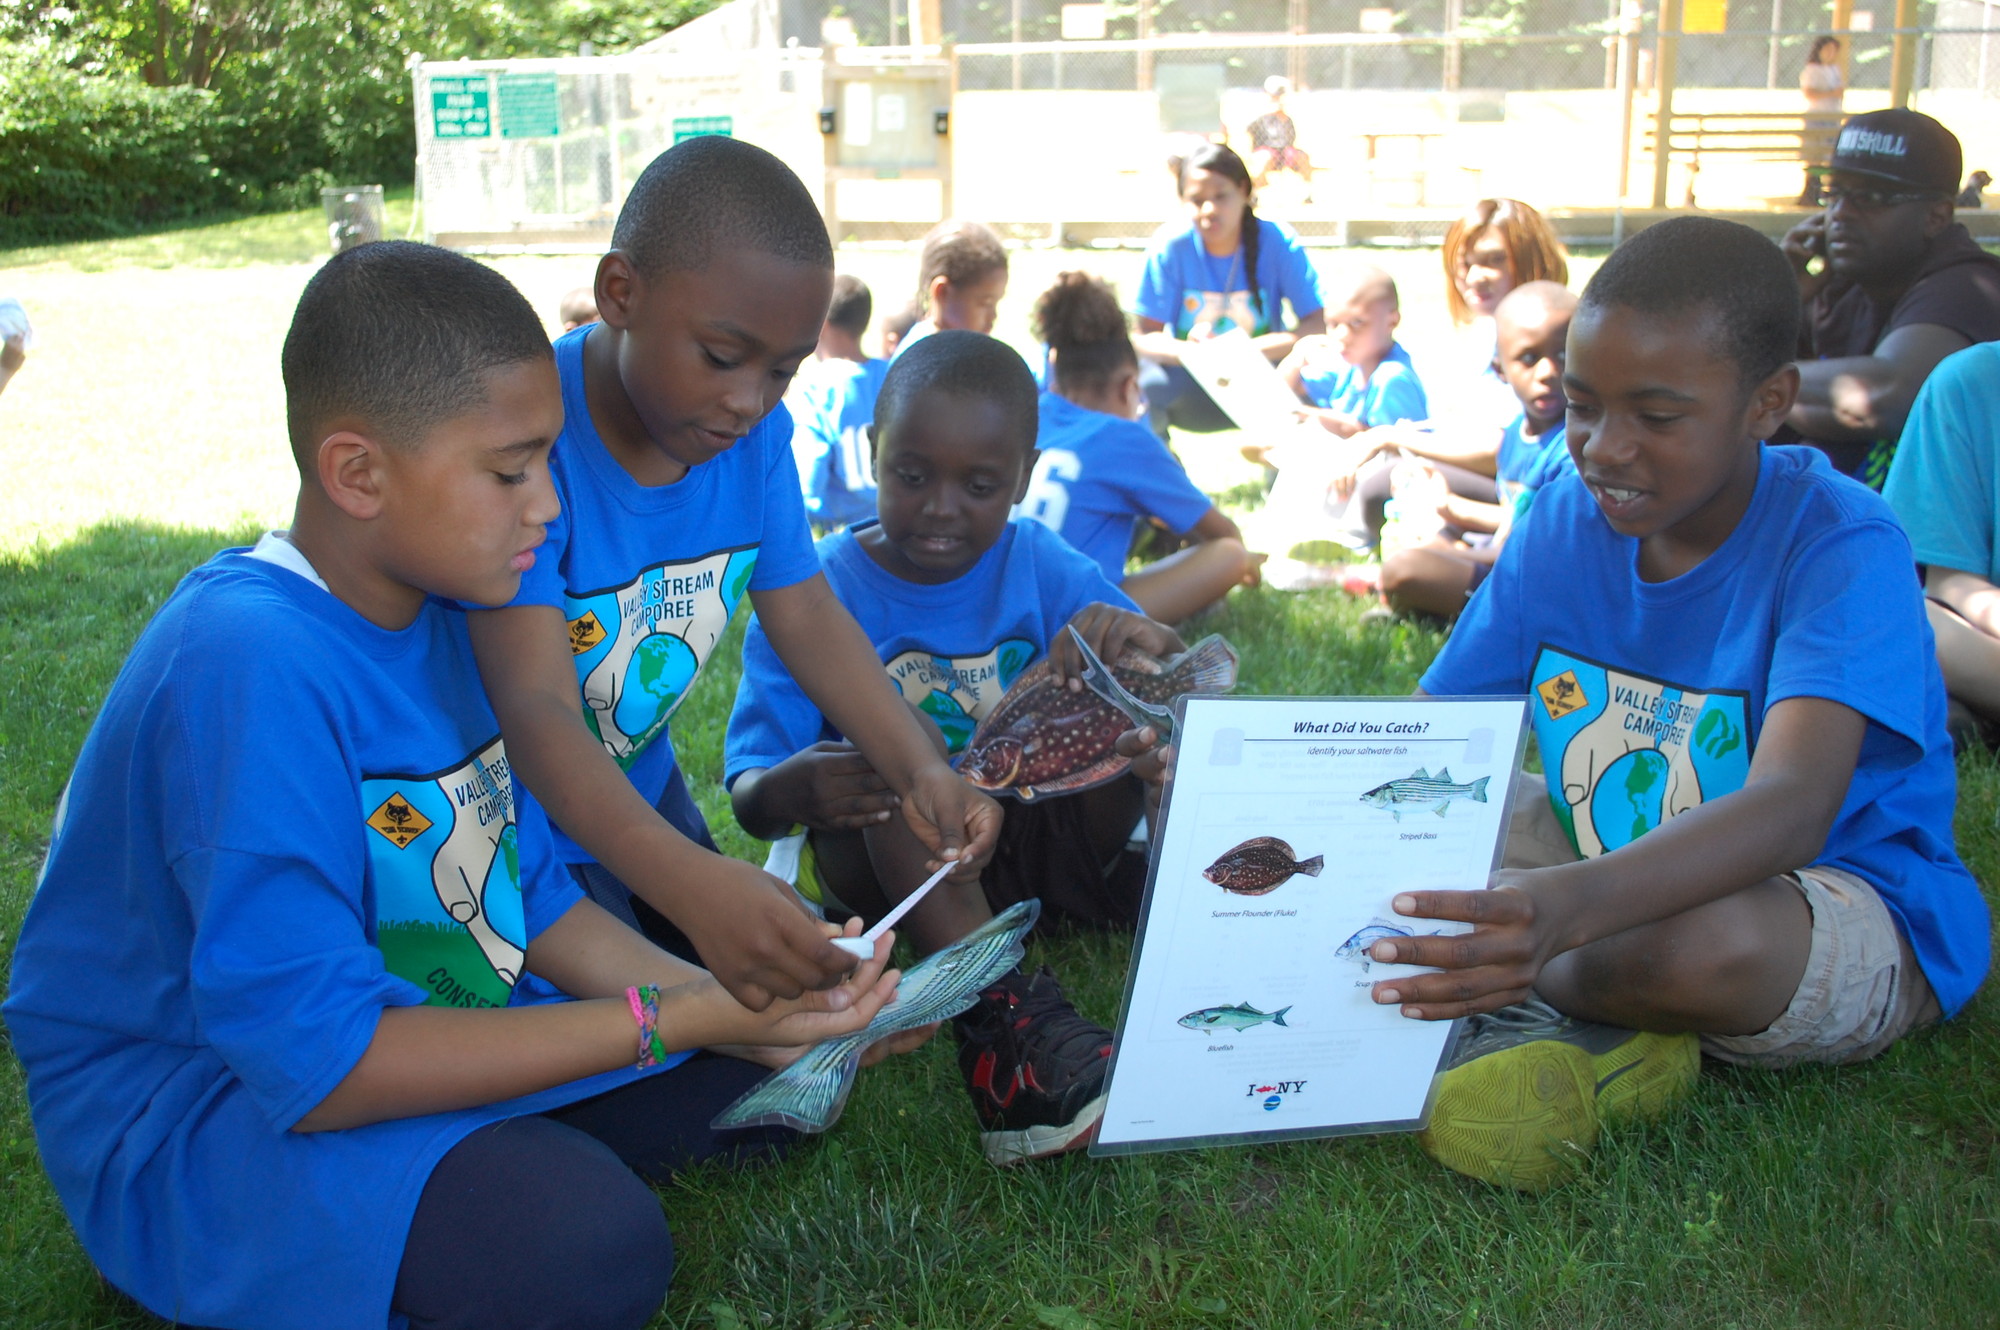 Pack 106 Cub Scouts, from left, Brian Ward, Anthony Wood, Darius Dorsey and Cedrik Jean-Baptiste took part in the nature-based programs.